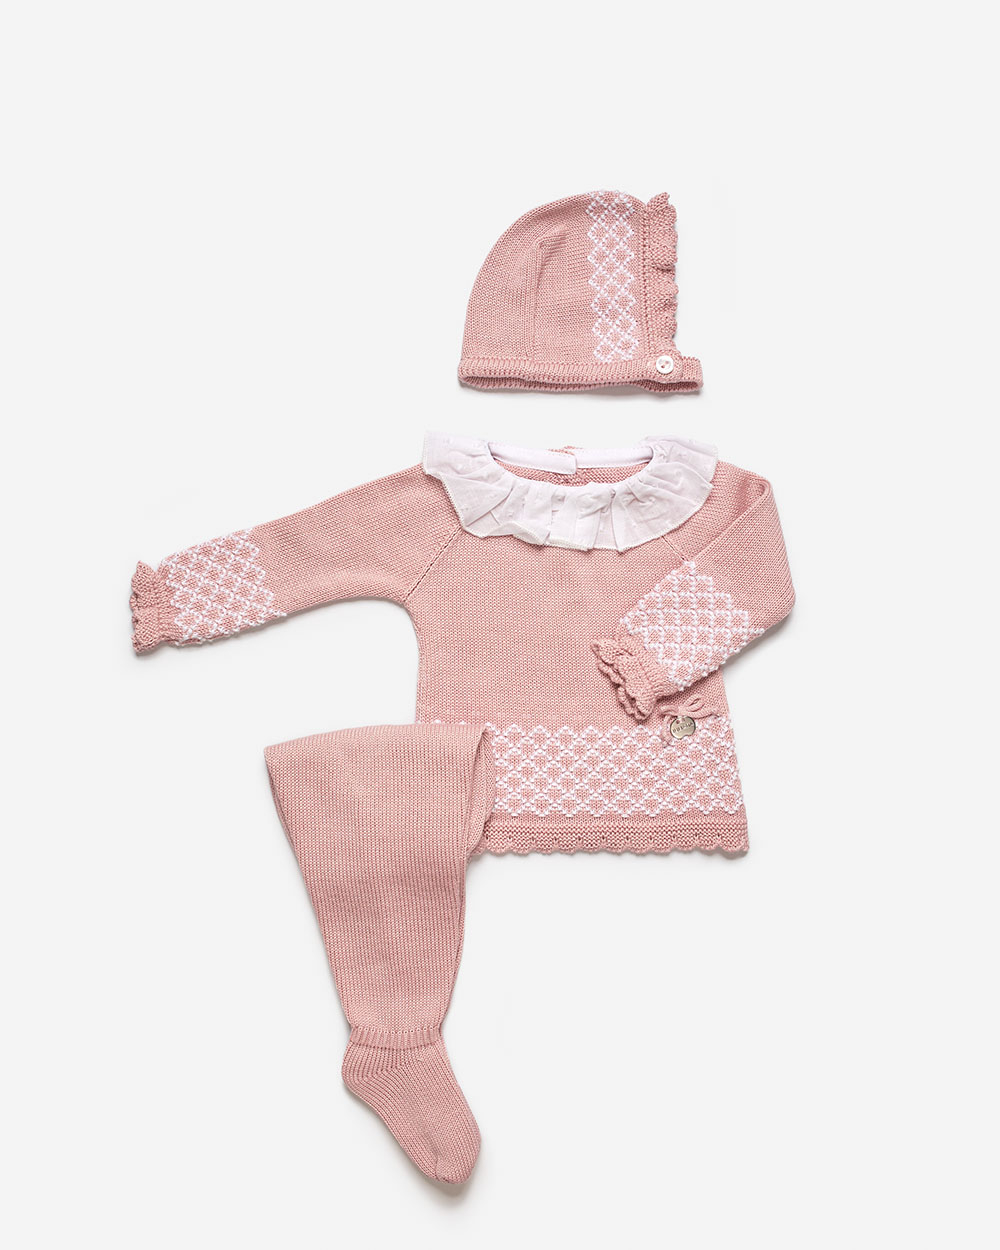 Romantic powder pink baby outfit